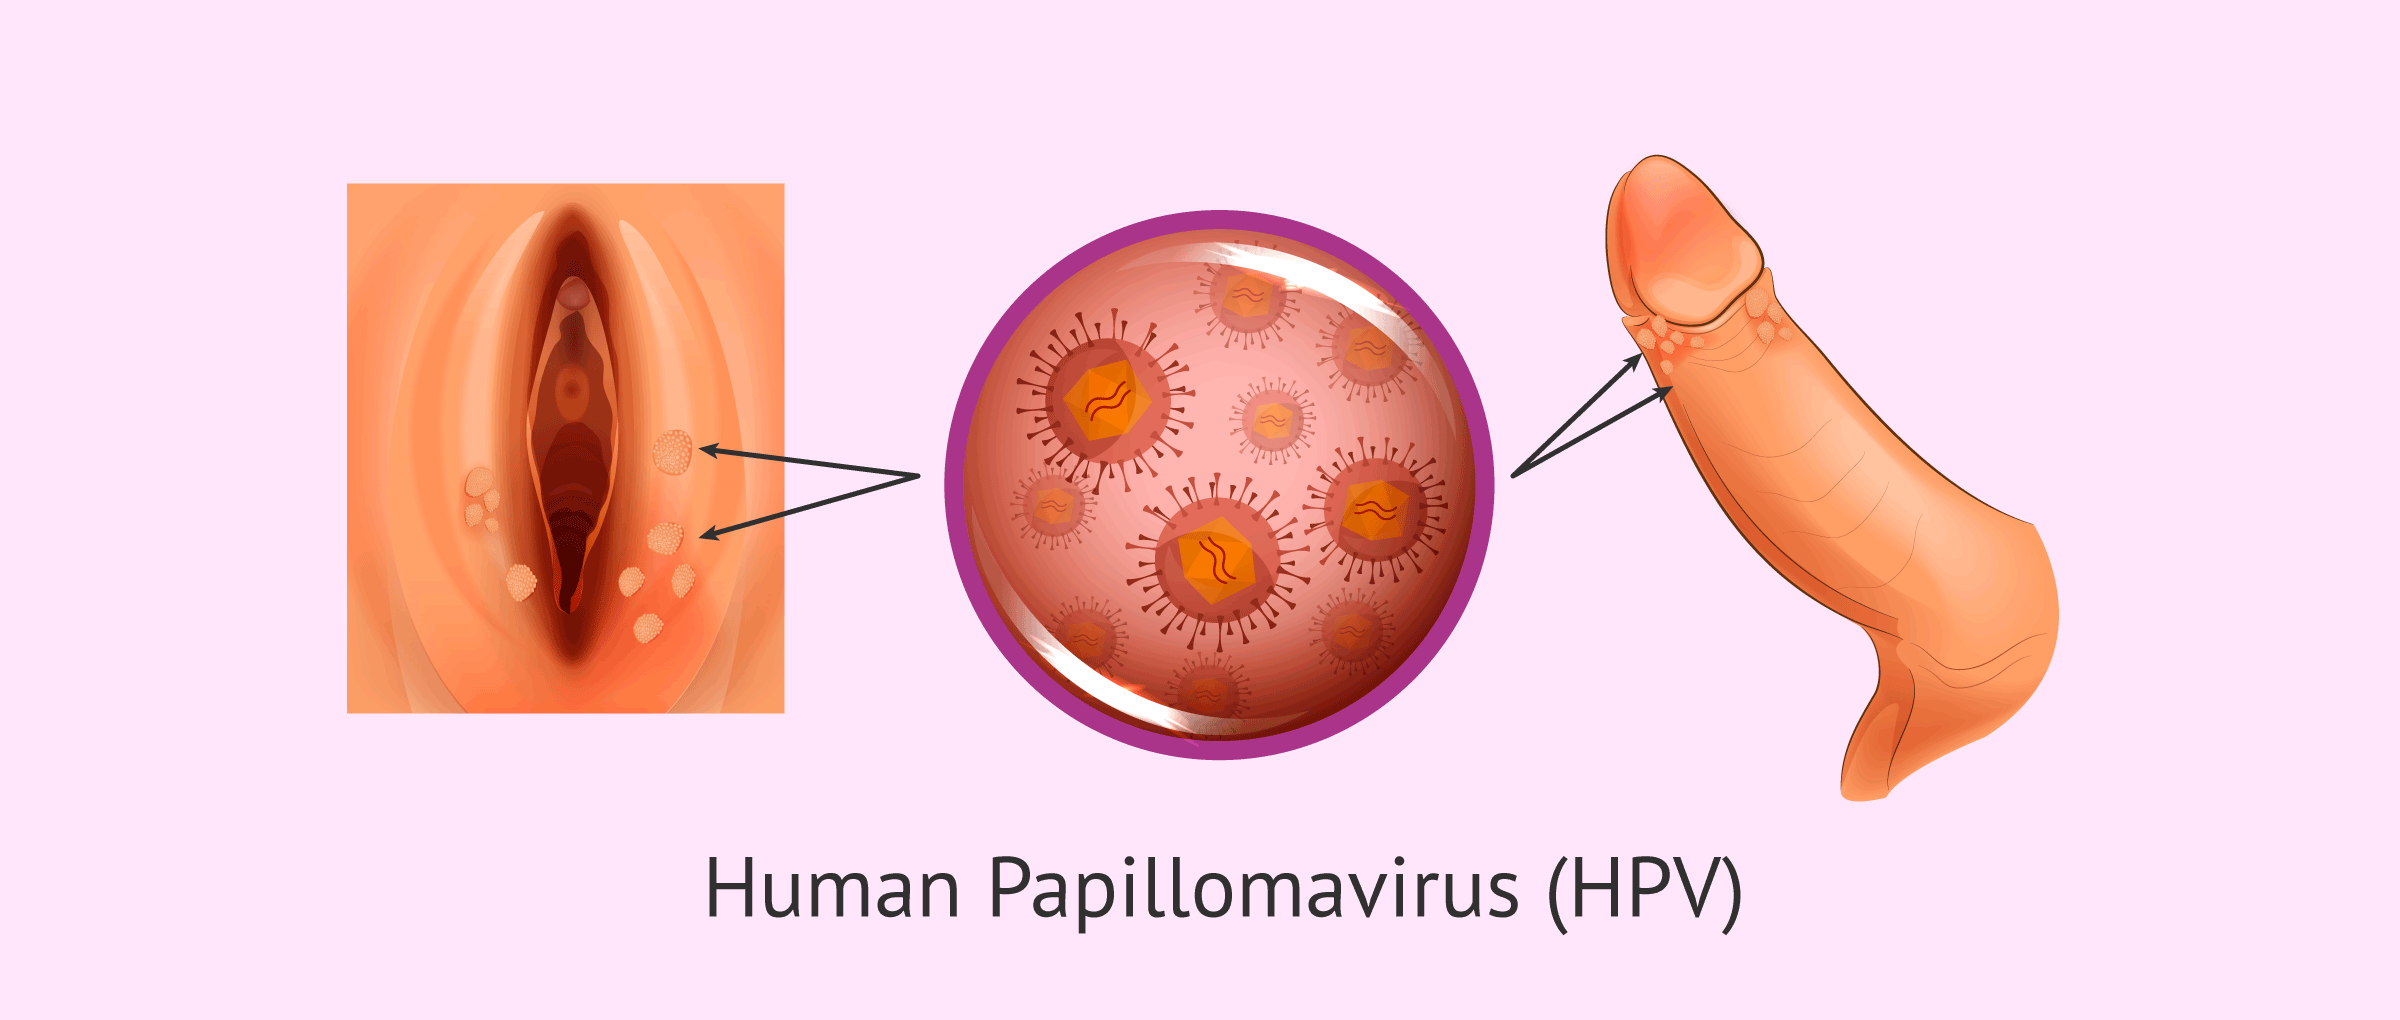 hpv causes genital warts